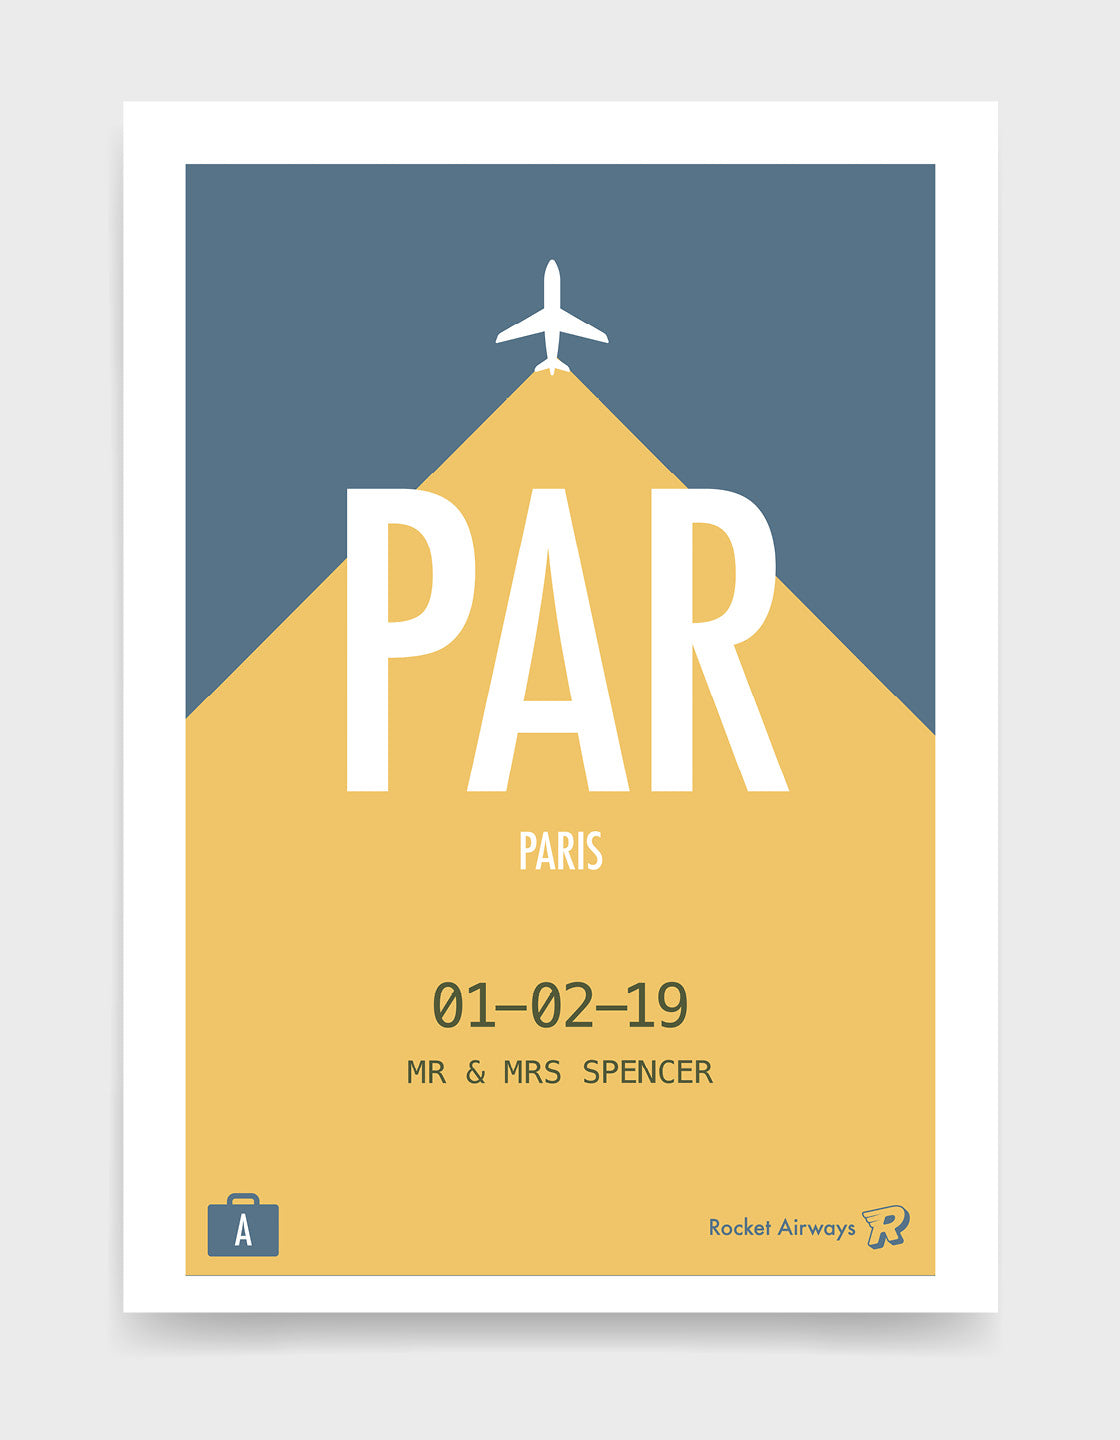 Retro travel destination print in blue & yellow with customisable details